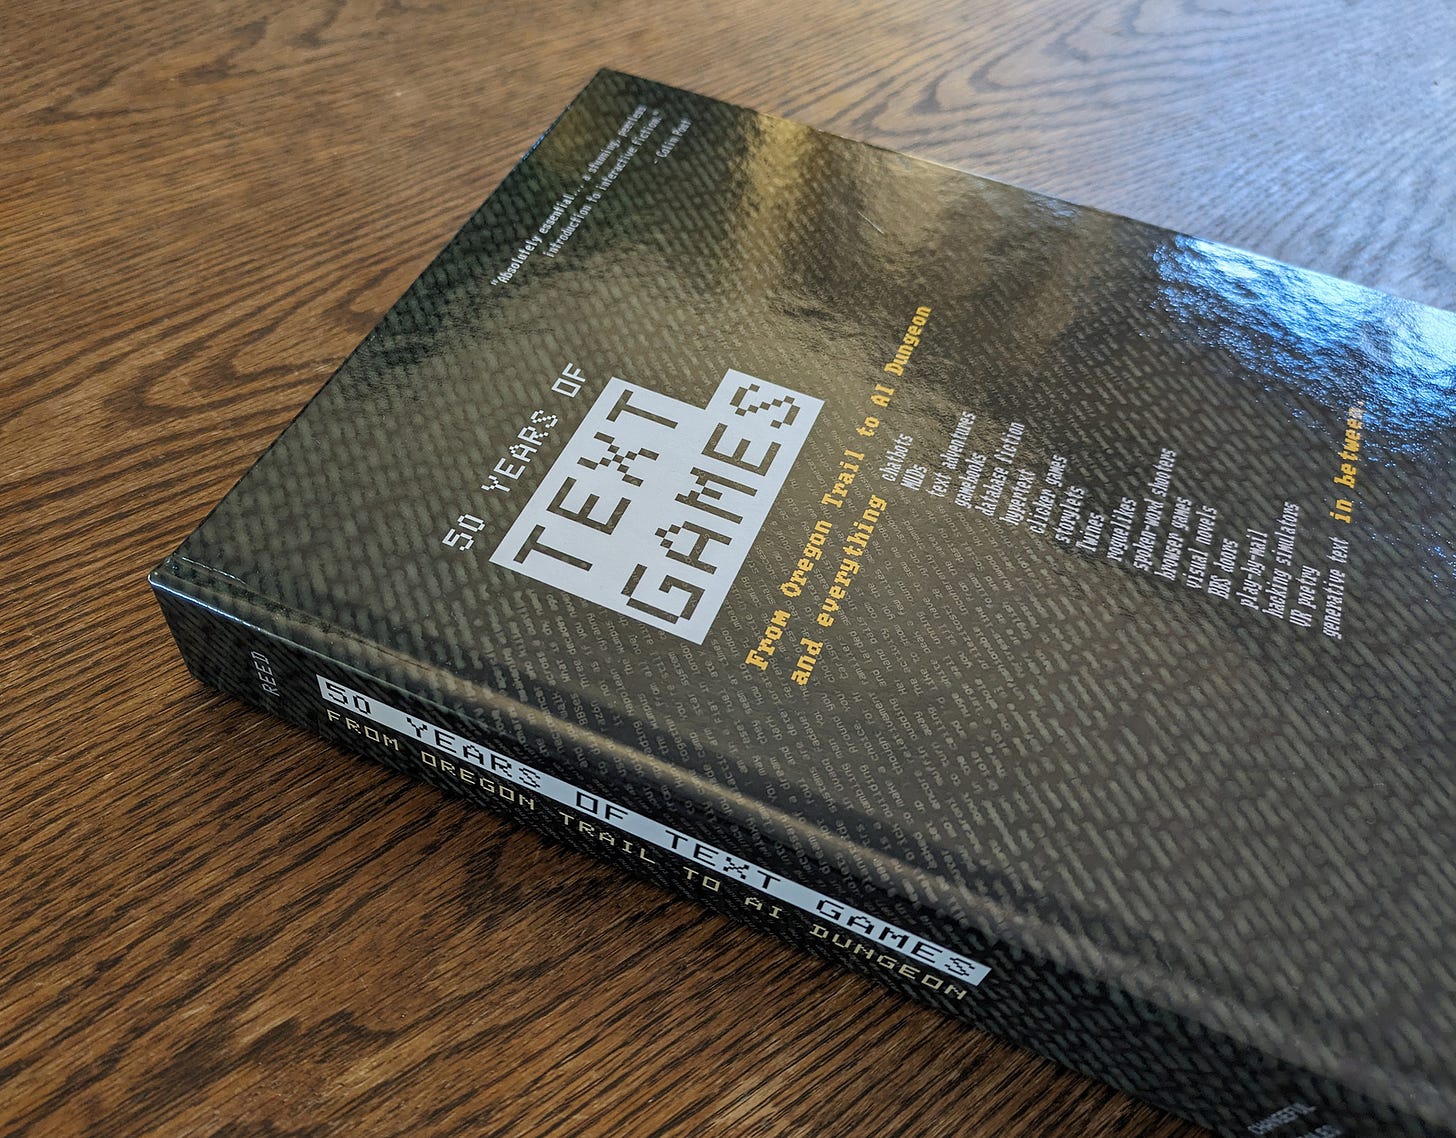 The casebound print-on-demand edition of 50 Years of Text Games, with cover design featuring blurry green terminal text behind the title.